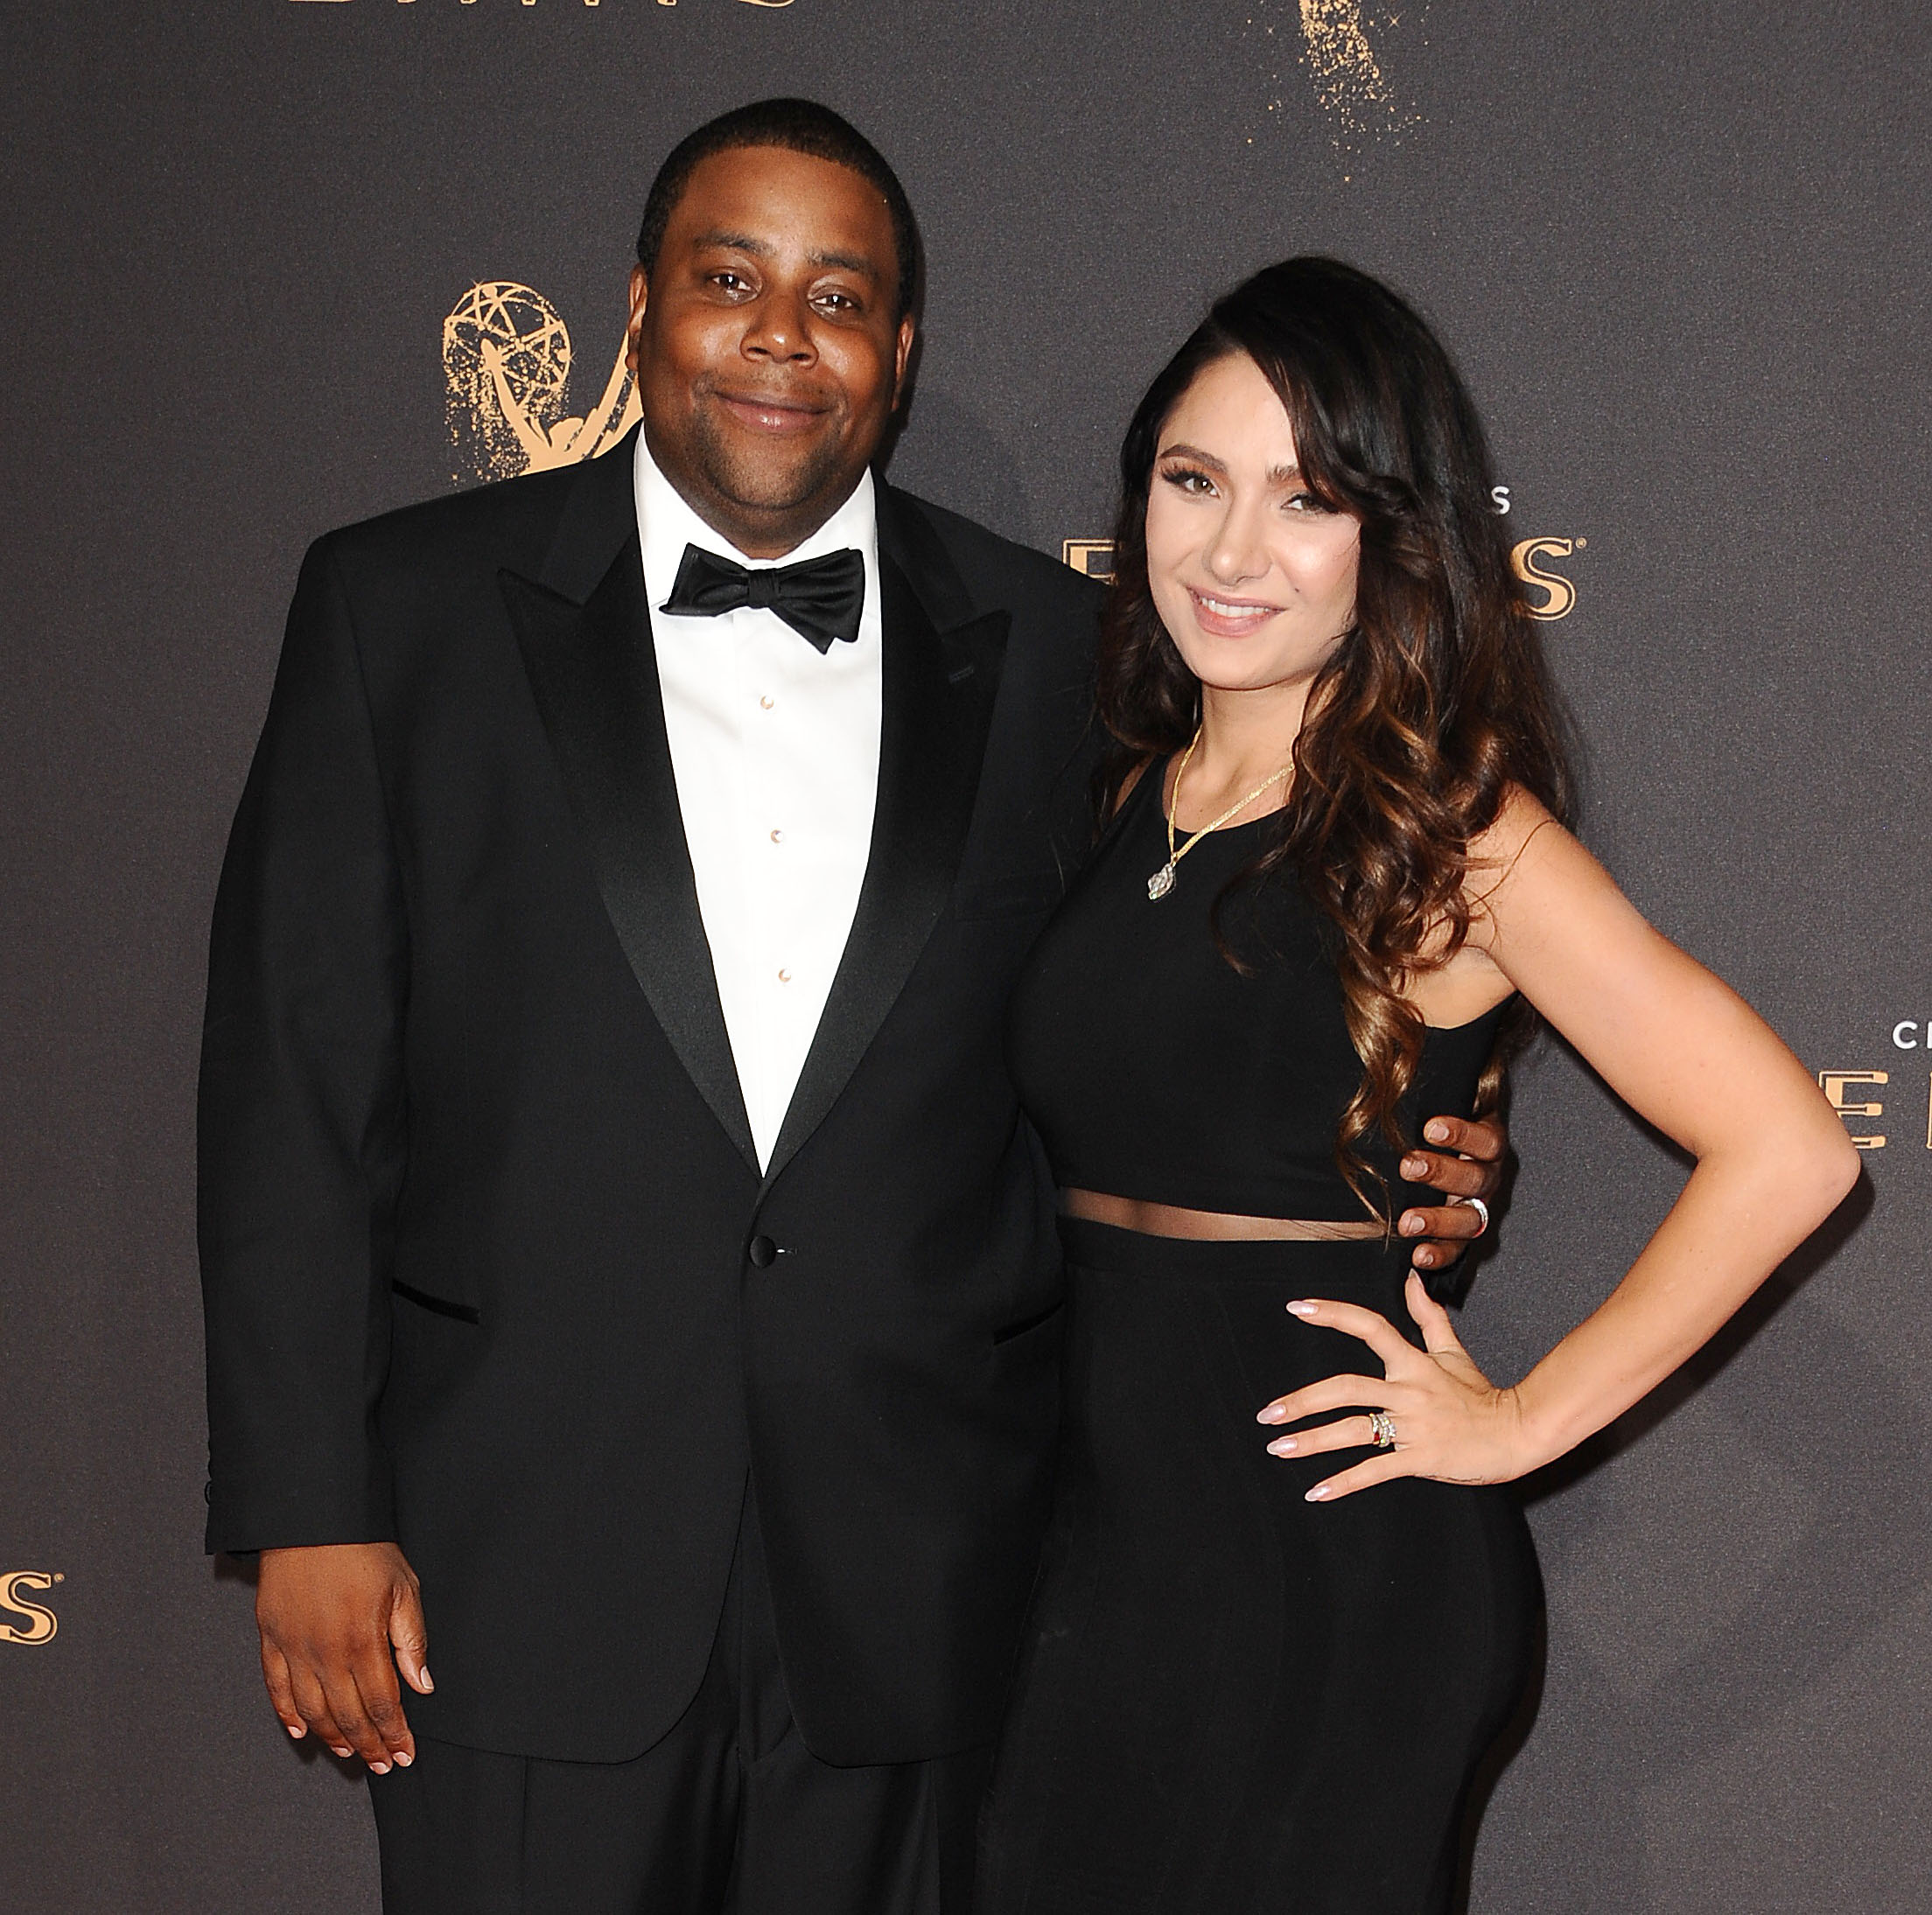 Kenan Thompson and Christina Evangeline at the 2017 Creative Arts Emmy Awards on September 9, 2017, in Los Angeles, California. | Source: Getty Images